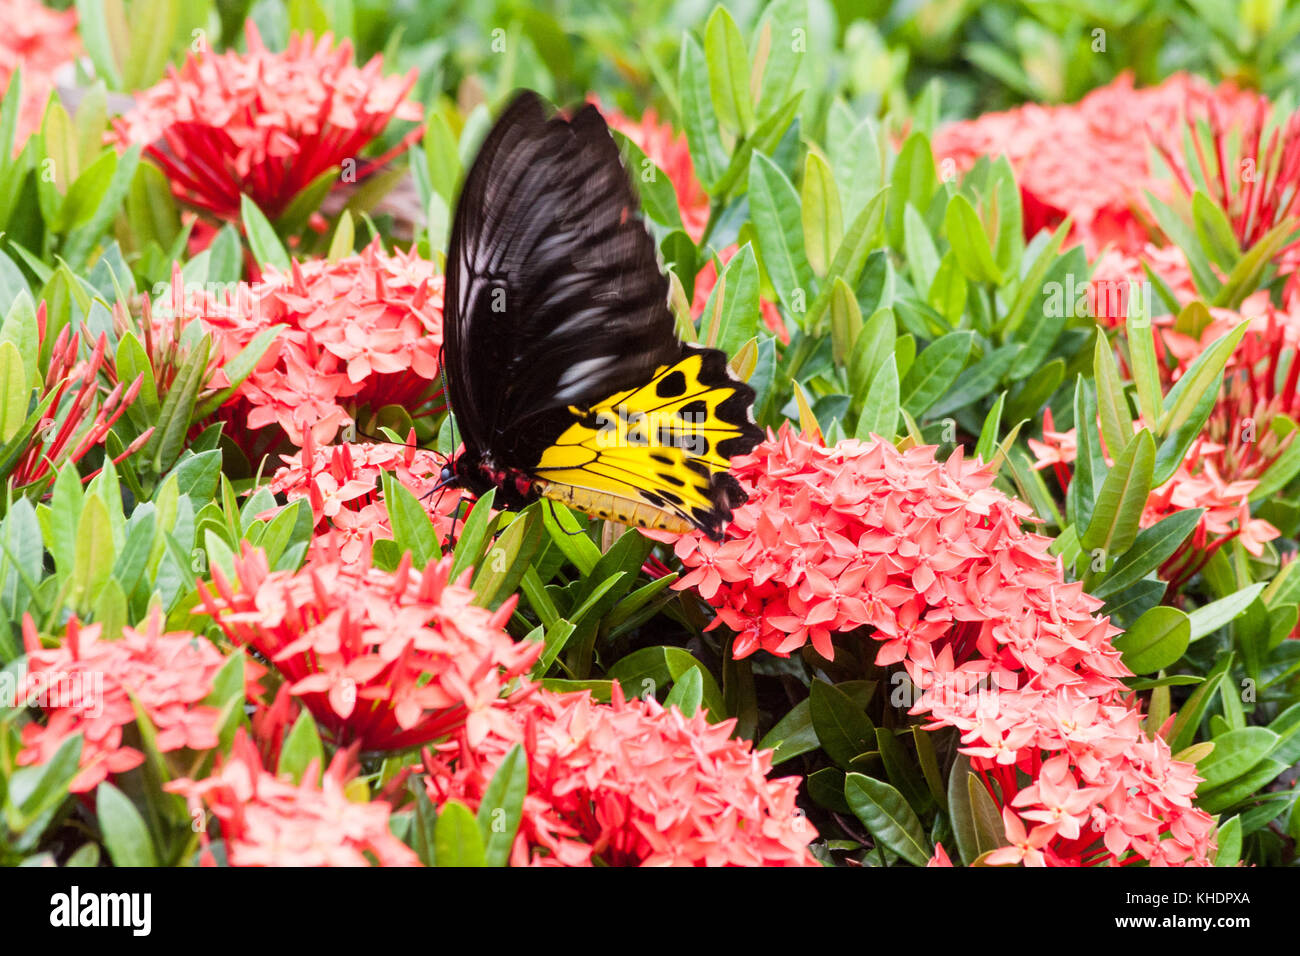 The Common Birdwing butterfly, Troides helena taking nectar from the flowers of Ixora coccinea Stock Photo